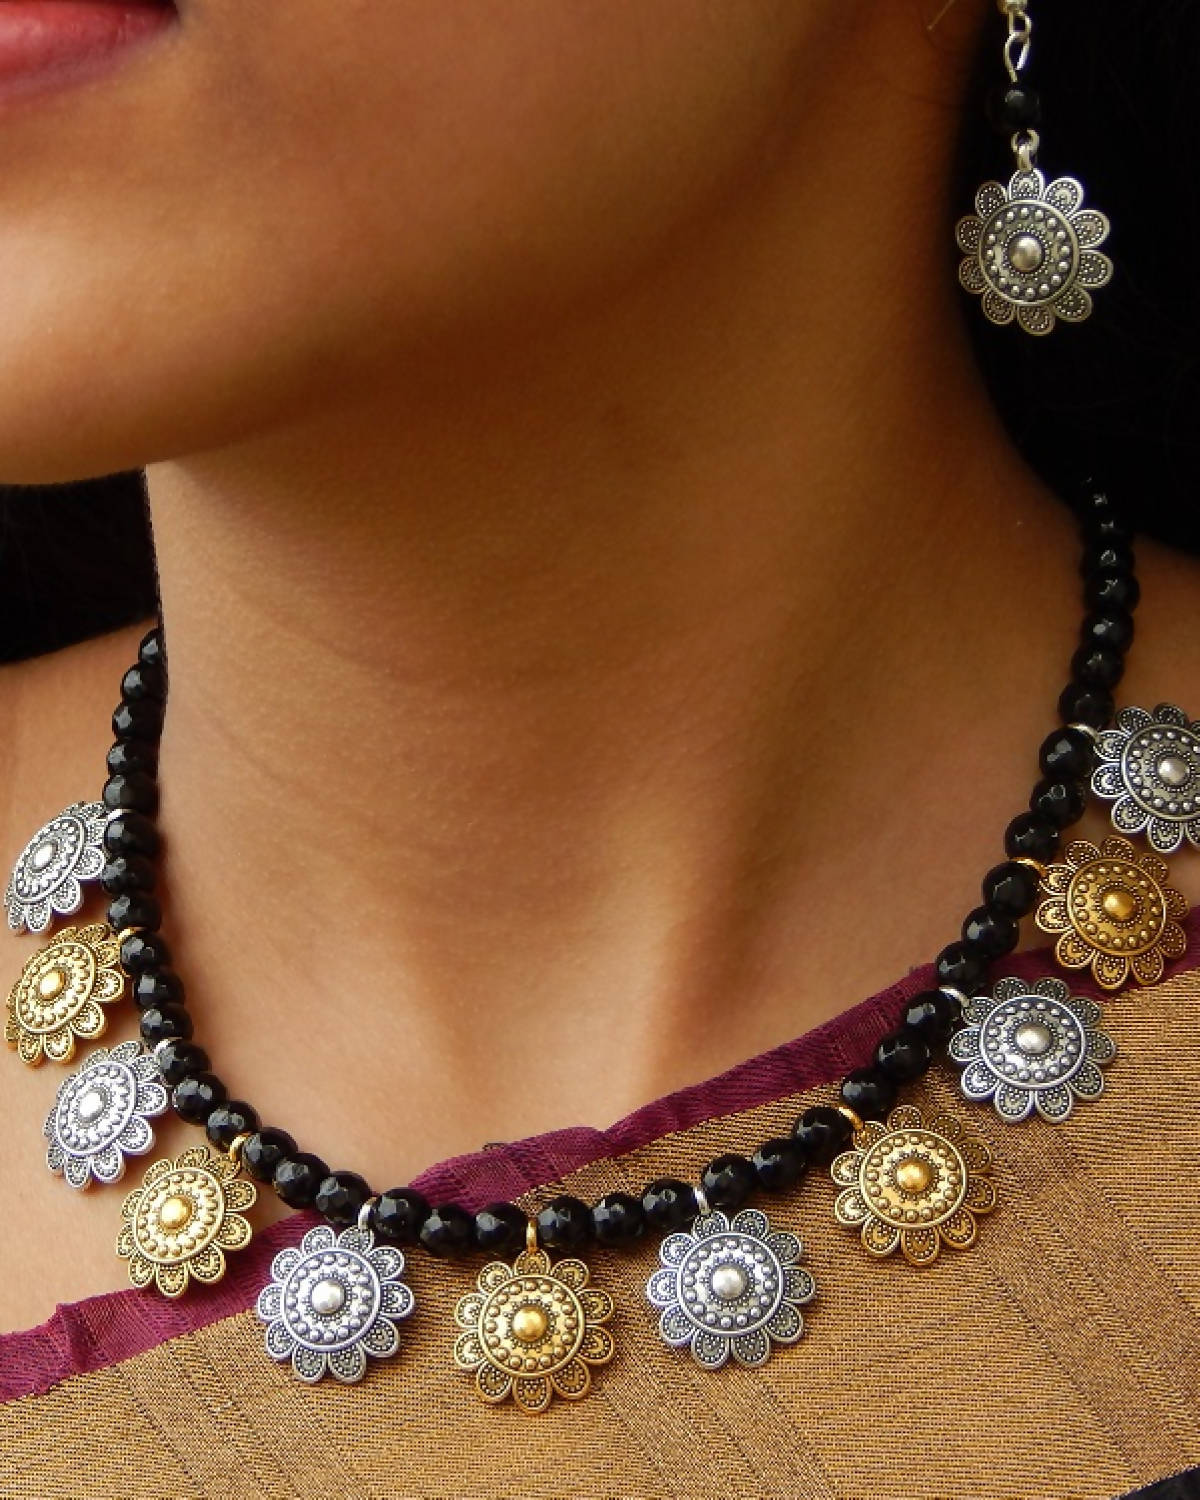 Oxidized Dual Colour Flower Charms Black Agate Beads Necklace Set with Double Pair Earrings